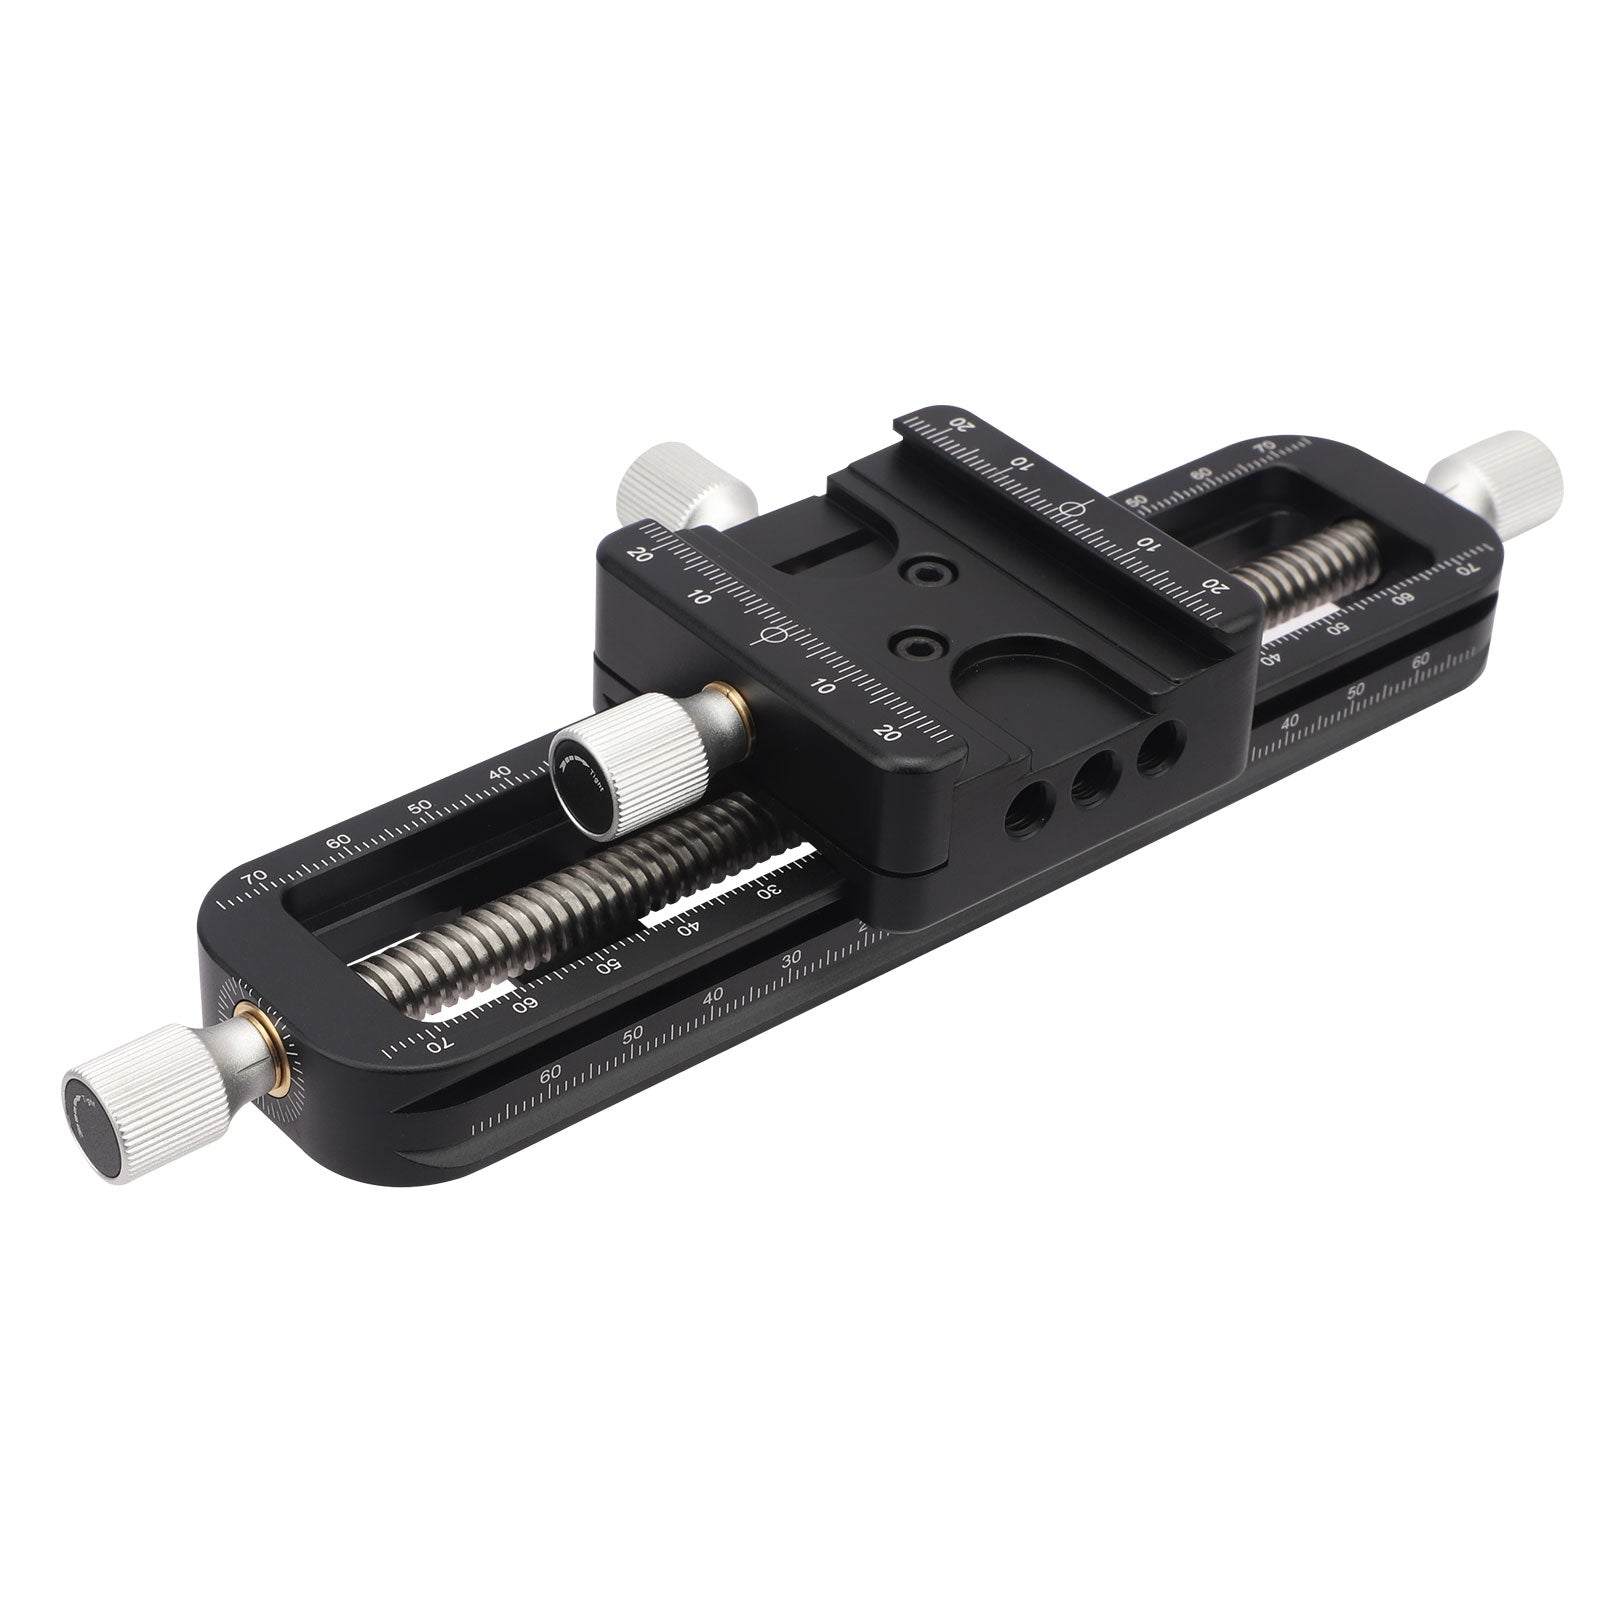 Haoge FM-160 Wormdrive Macro Rail for Macro photography, Focus stacking Precision Focus Slider/Close-up Shooting Clamp Plate Fine-tuning Screw rod